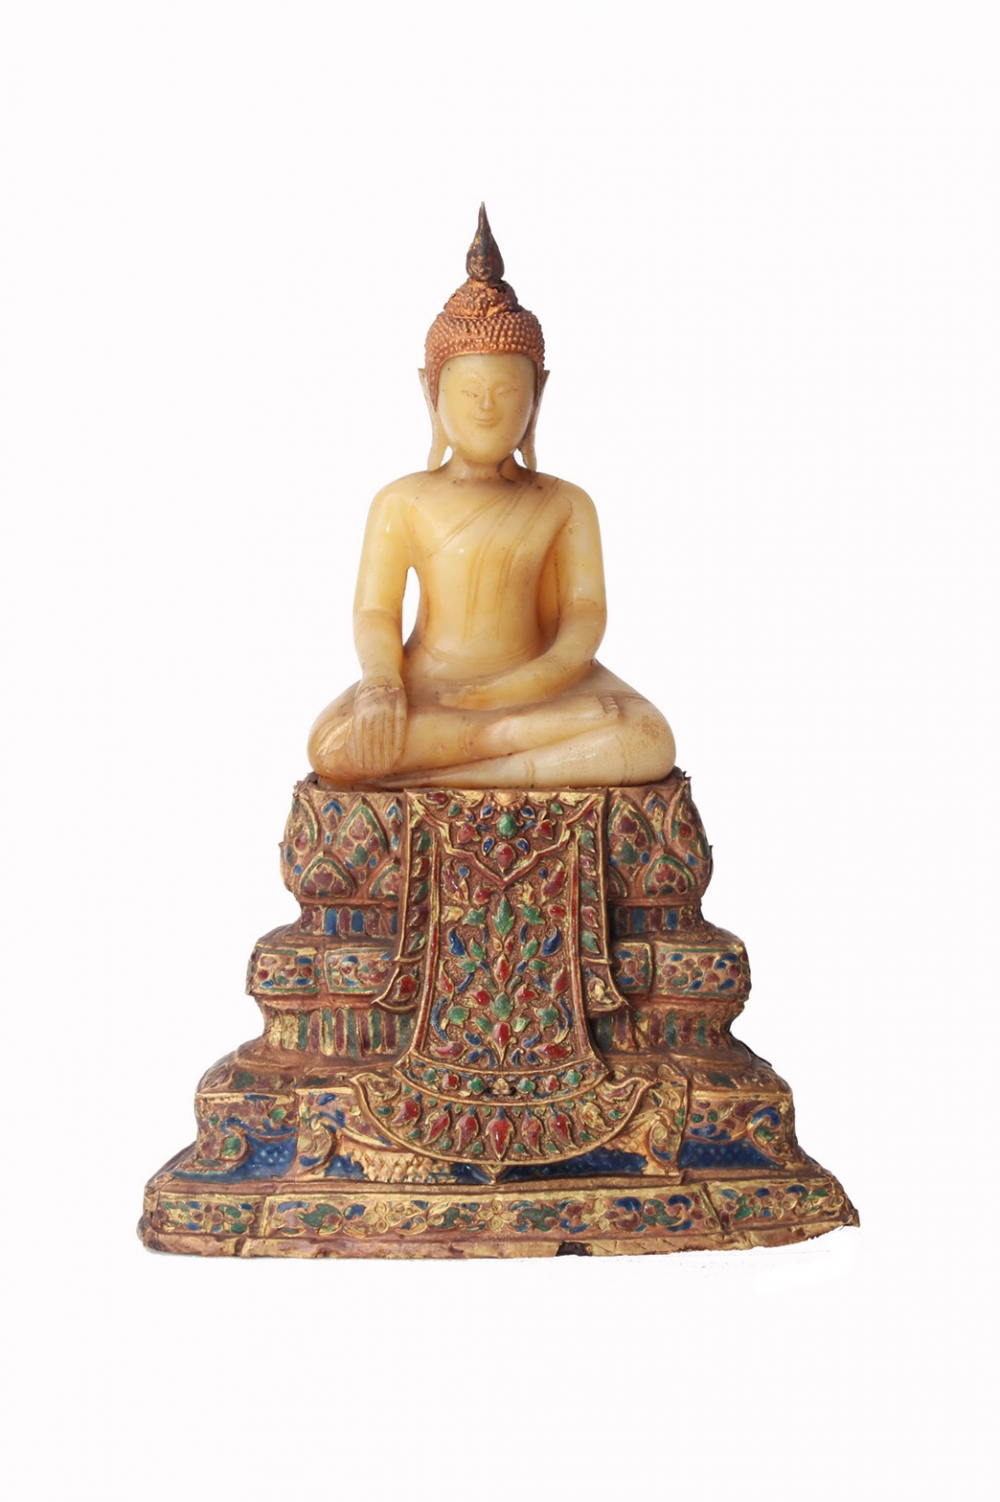 new-year-blessing-planned-for-buddha-artefacts-the-nation-4.jpg